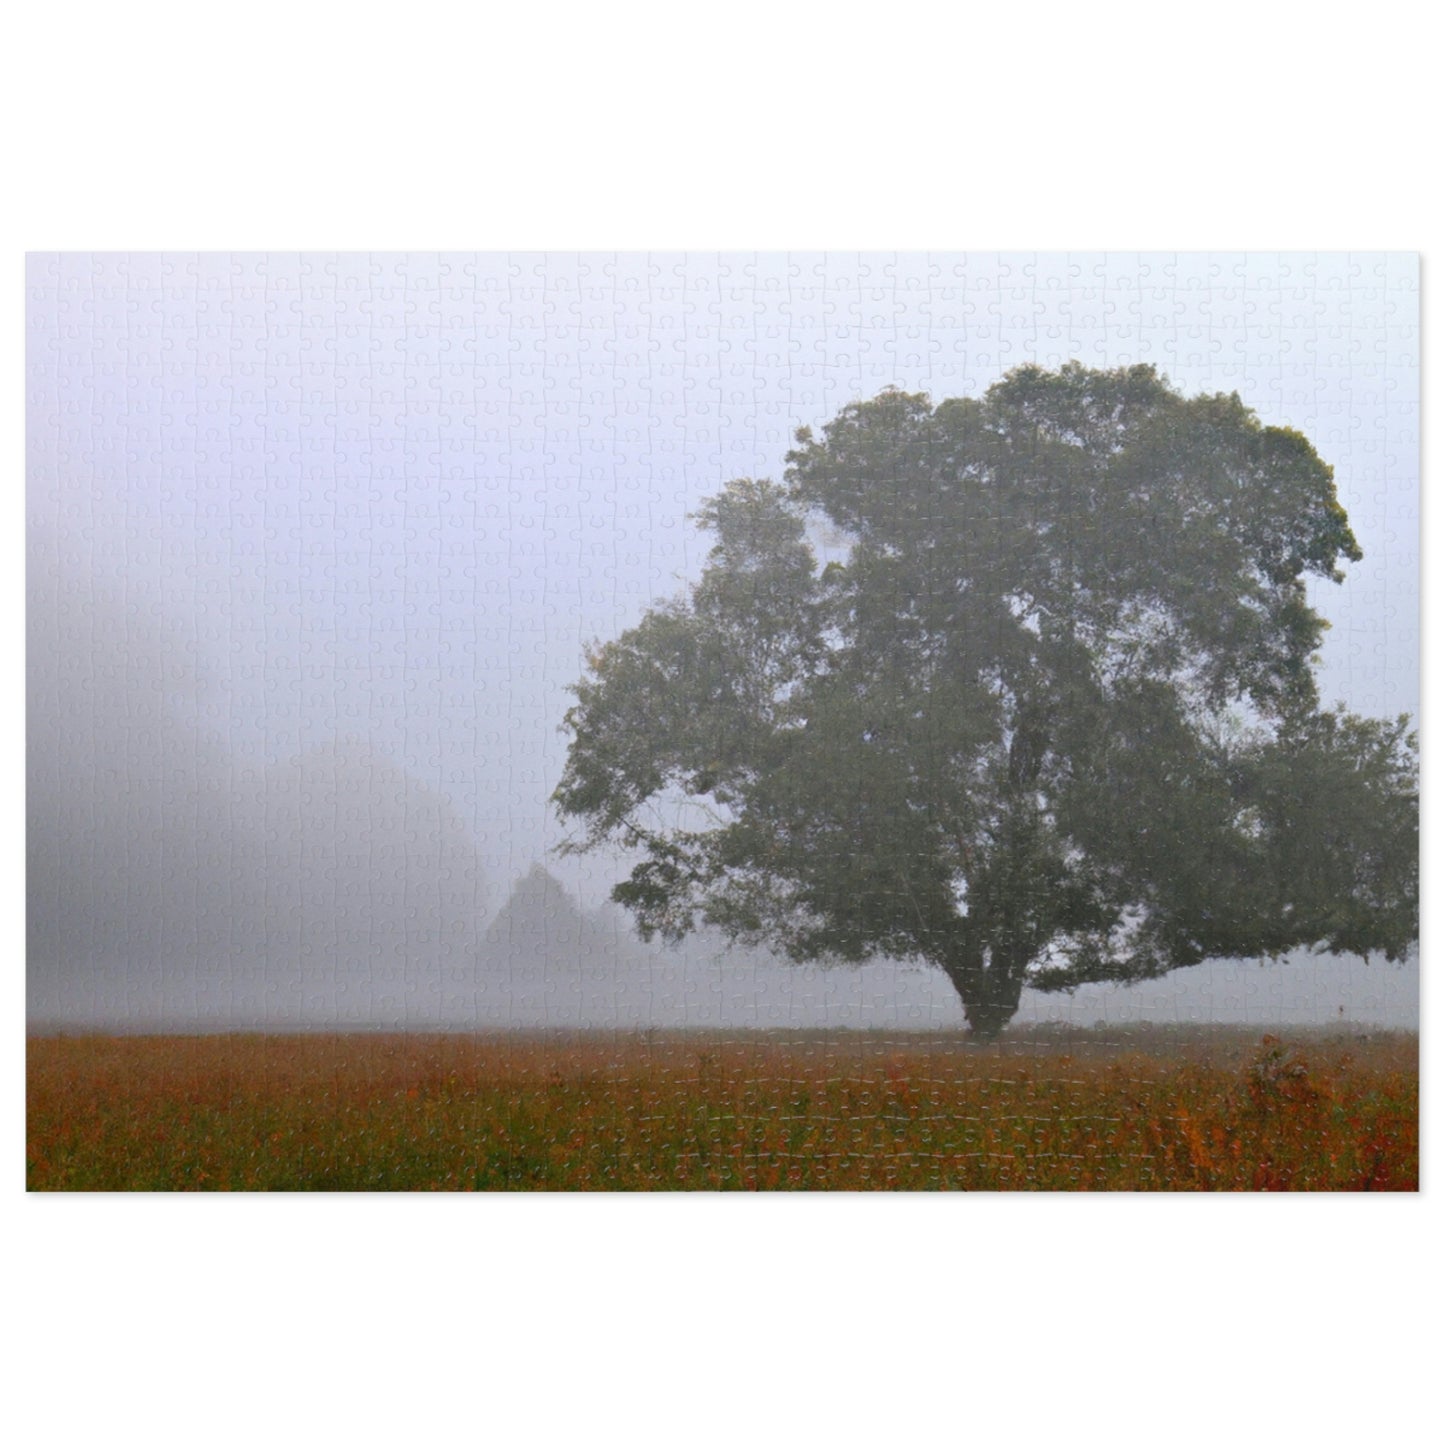 The Lonely Tree in the Foggy Meadow - The Alien Jigsaw Puzzle